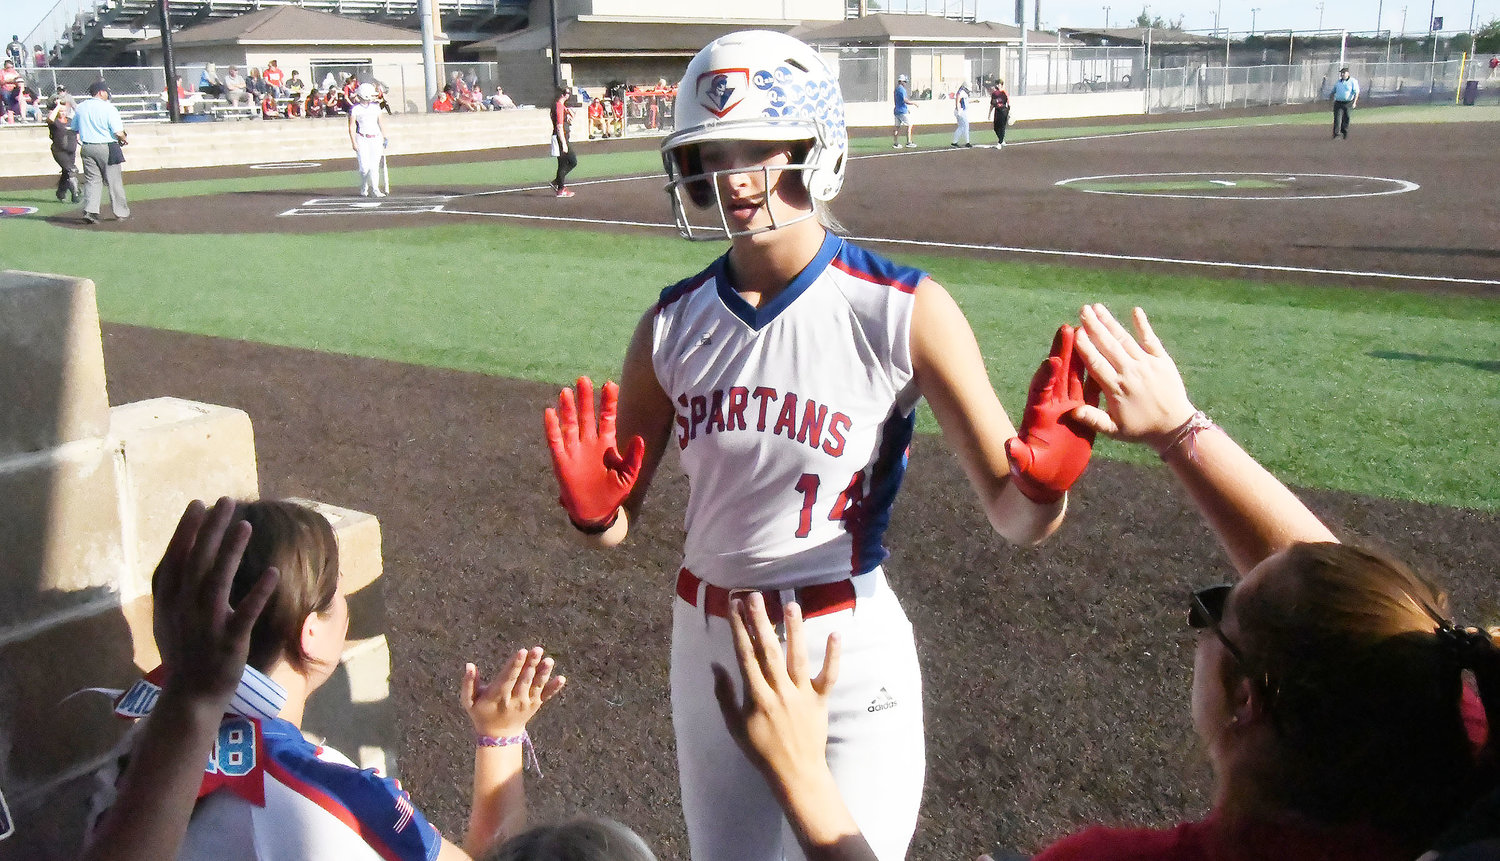 Moberly High School’s Chloe Ferguson (14) receives congratulations from her teammates after scoring a run during Tuesday’s game versus Hannibal at General Omar Bradley Field.